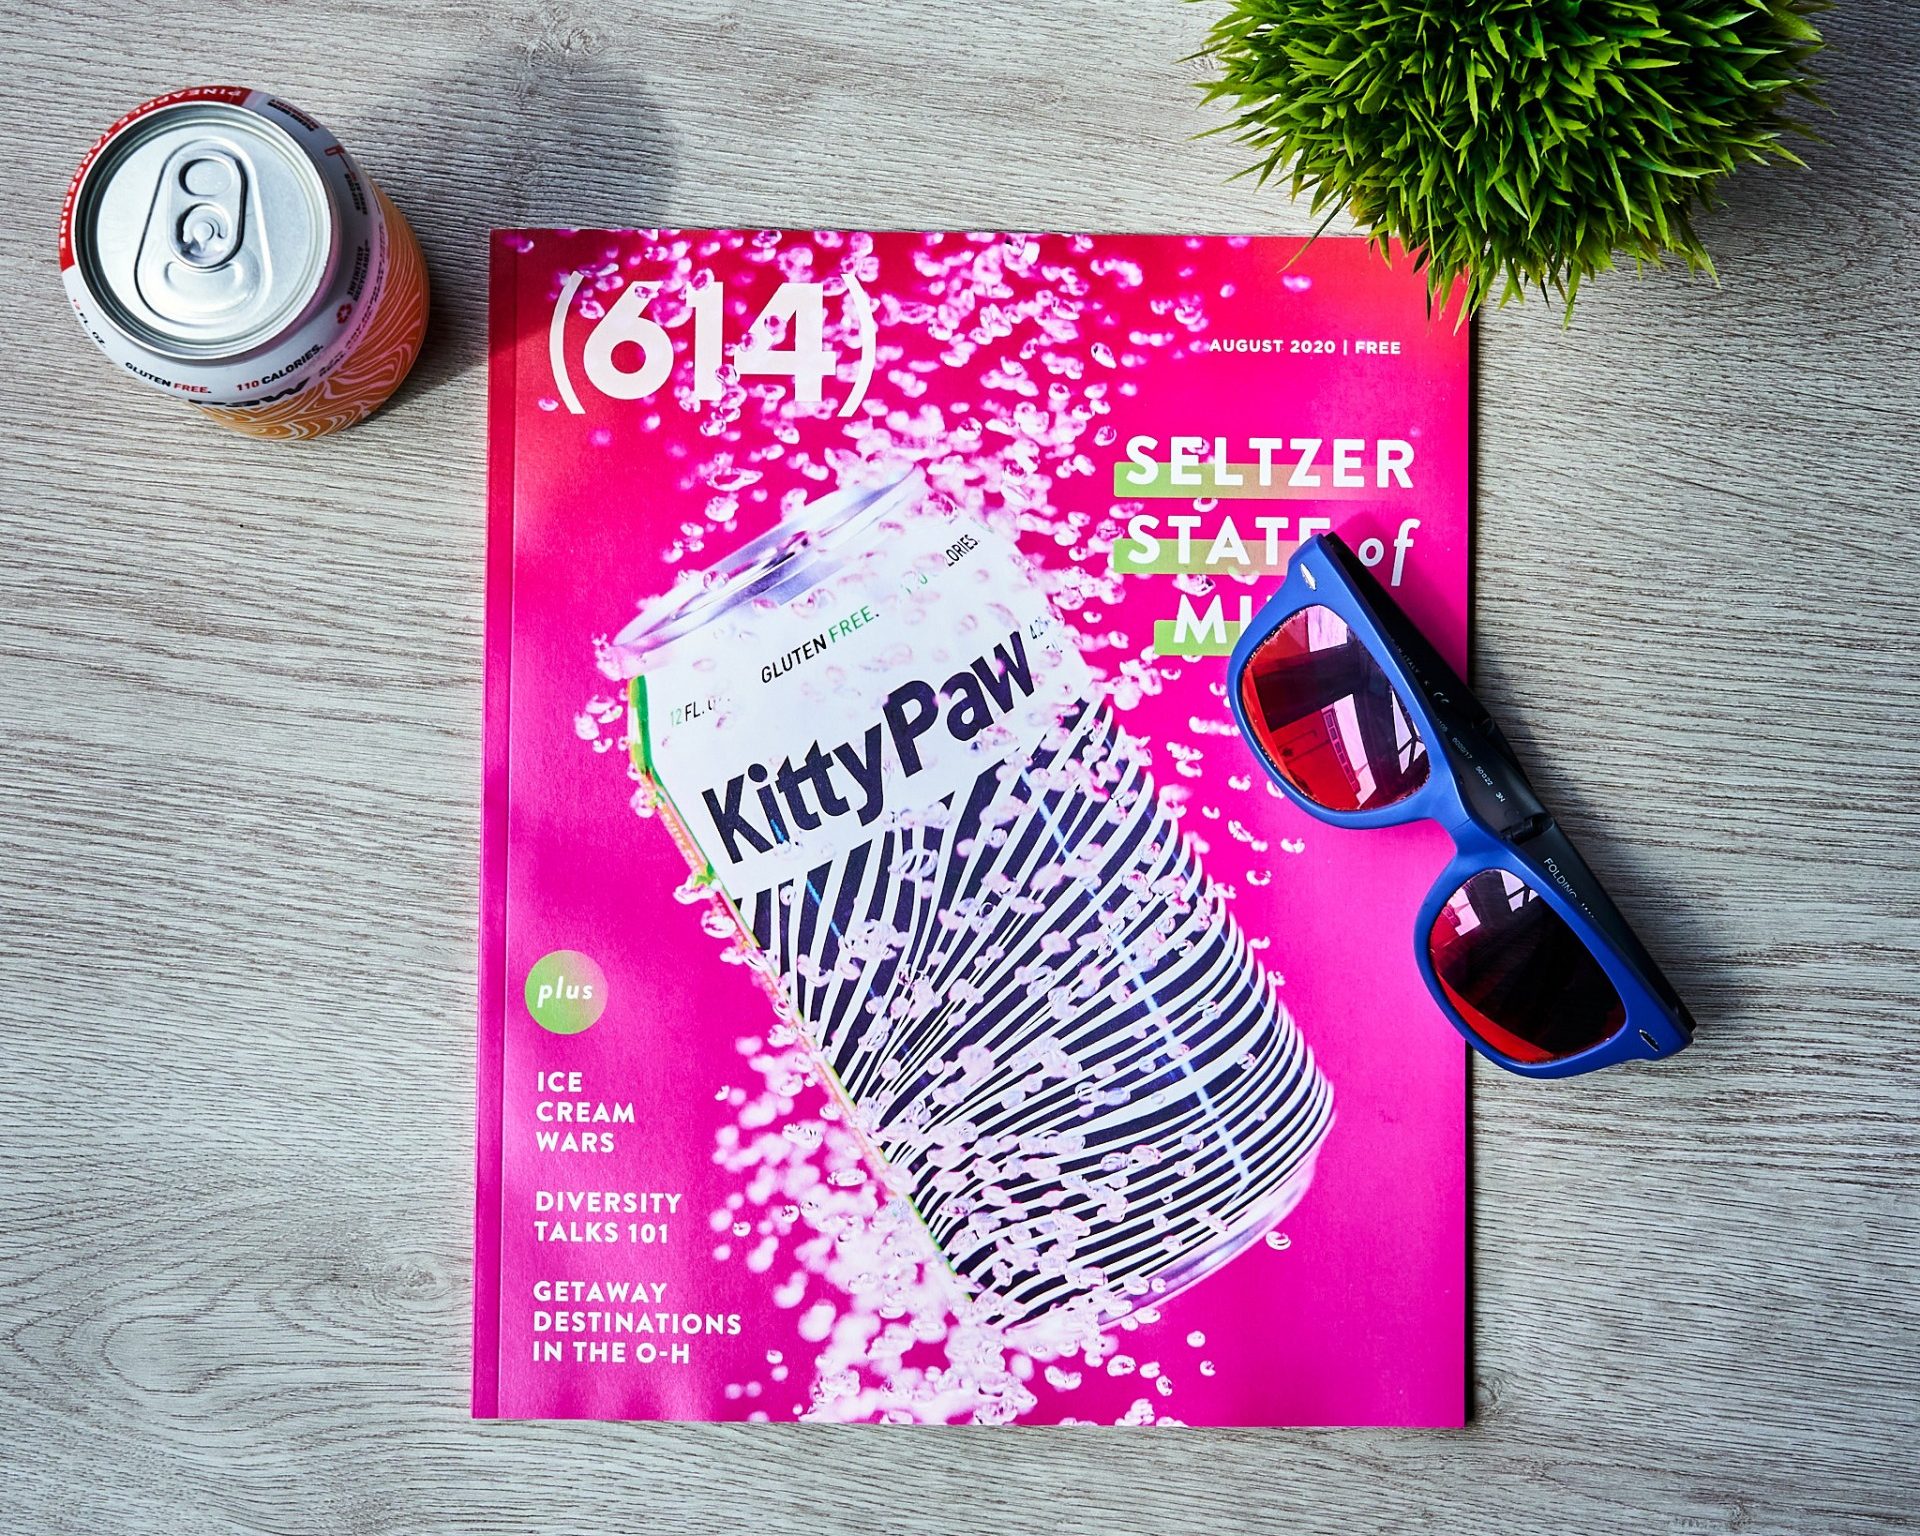 614 magazine August cover, hot pink with can of hard seltzer. Magazine is surrounded by a can of seltzer, a plant, and sunglasses.